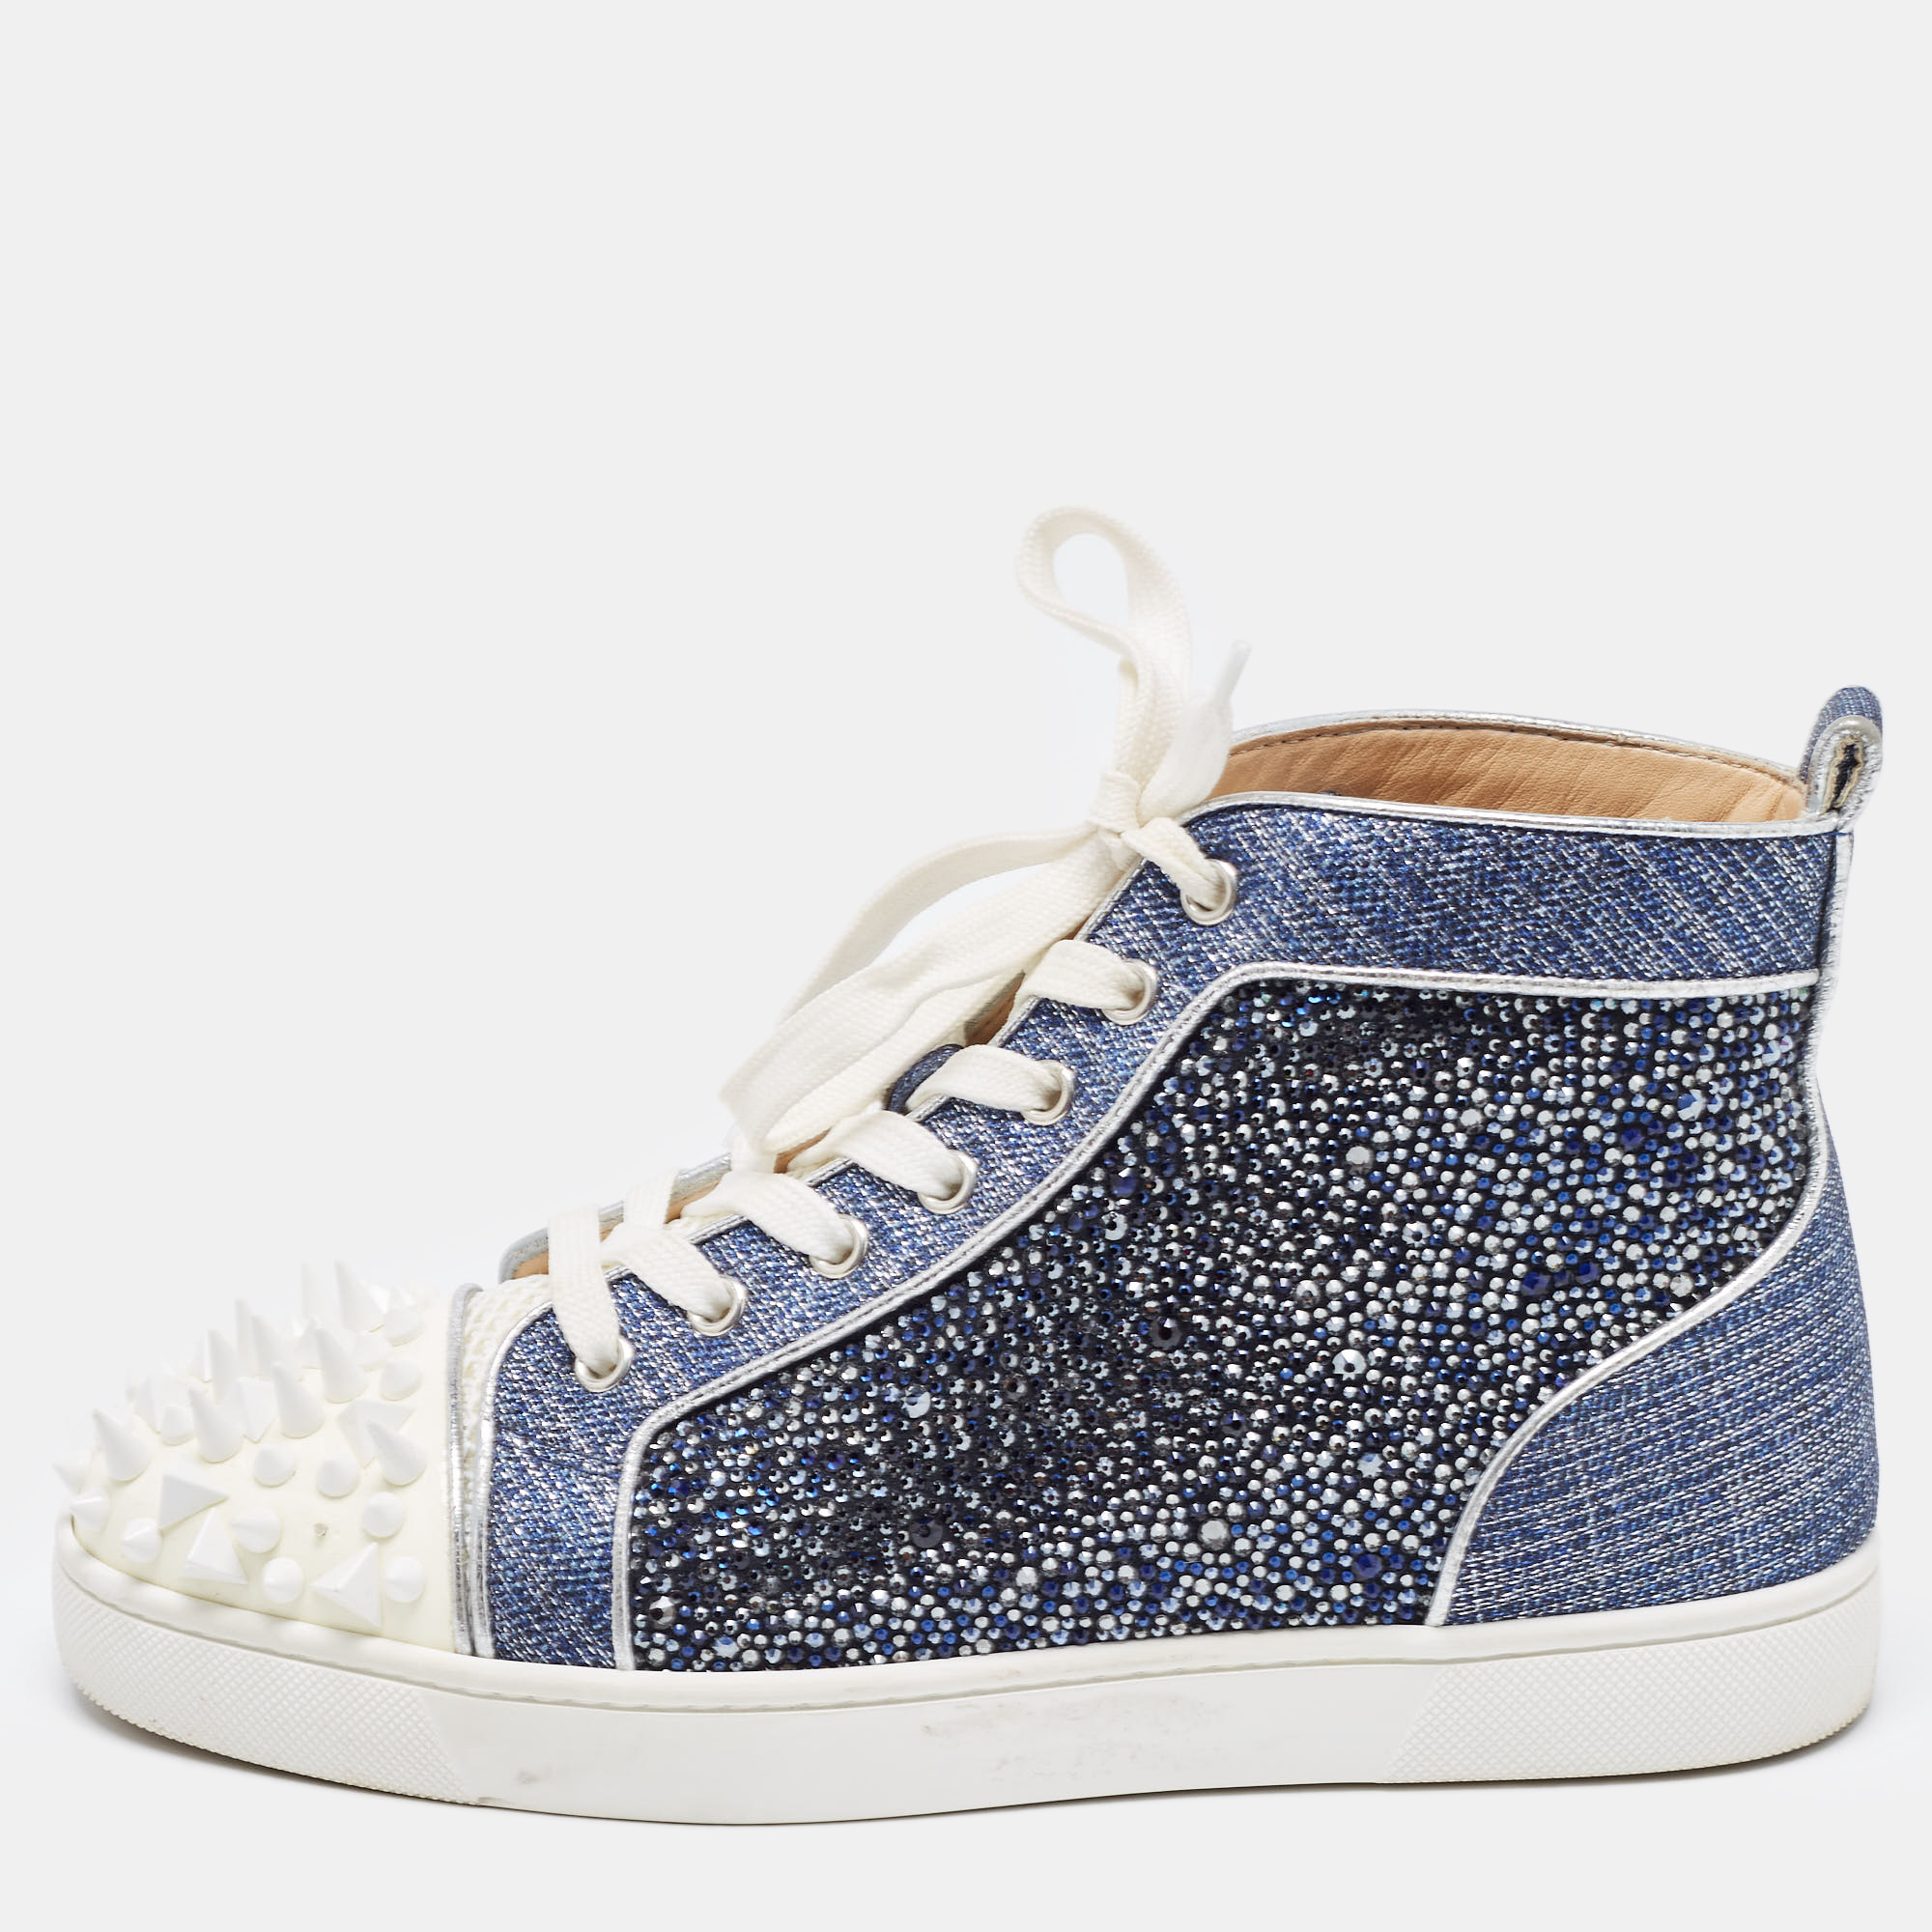 Pre-owned Christian Louboutin Blue/silver Denim And Patent Lou Degra Spikes Studded Hi High Top Sneakers Size 39